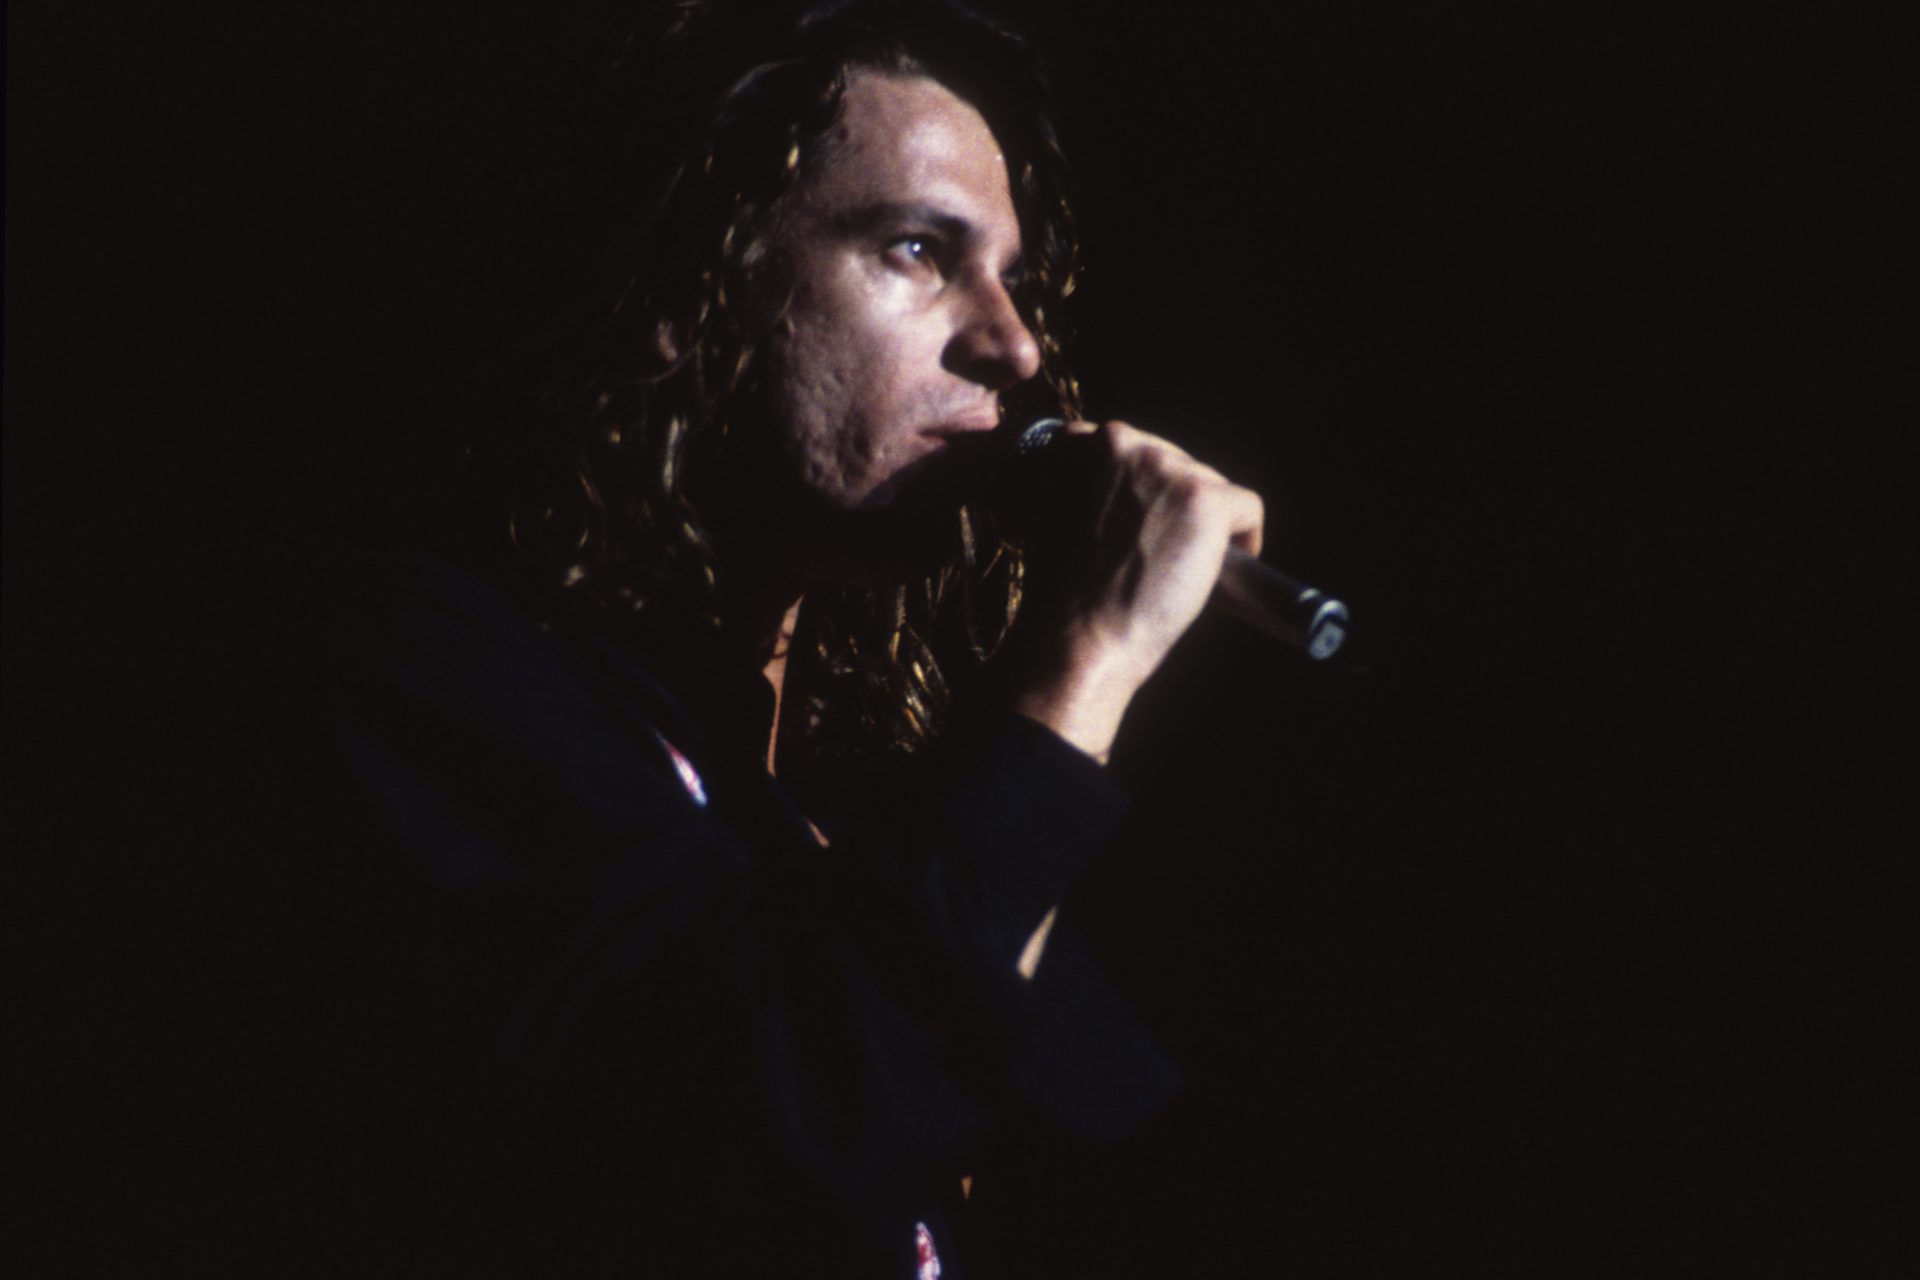 Michael Hutchence will always be remembered